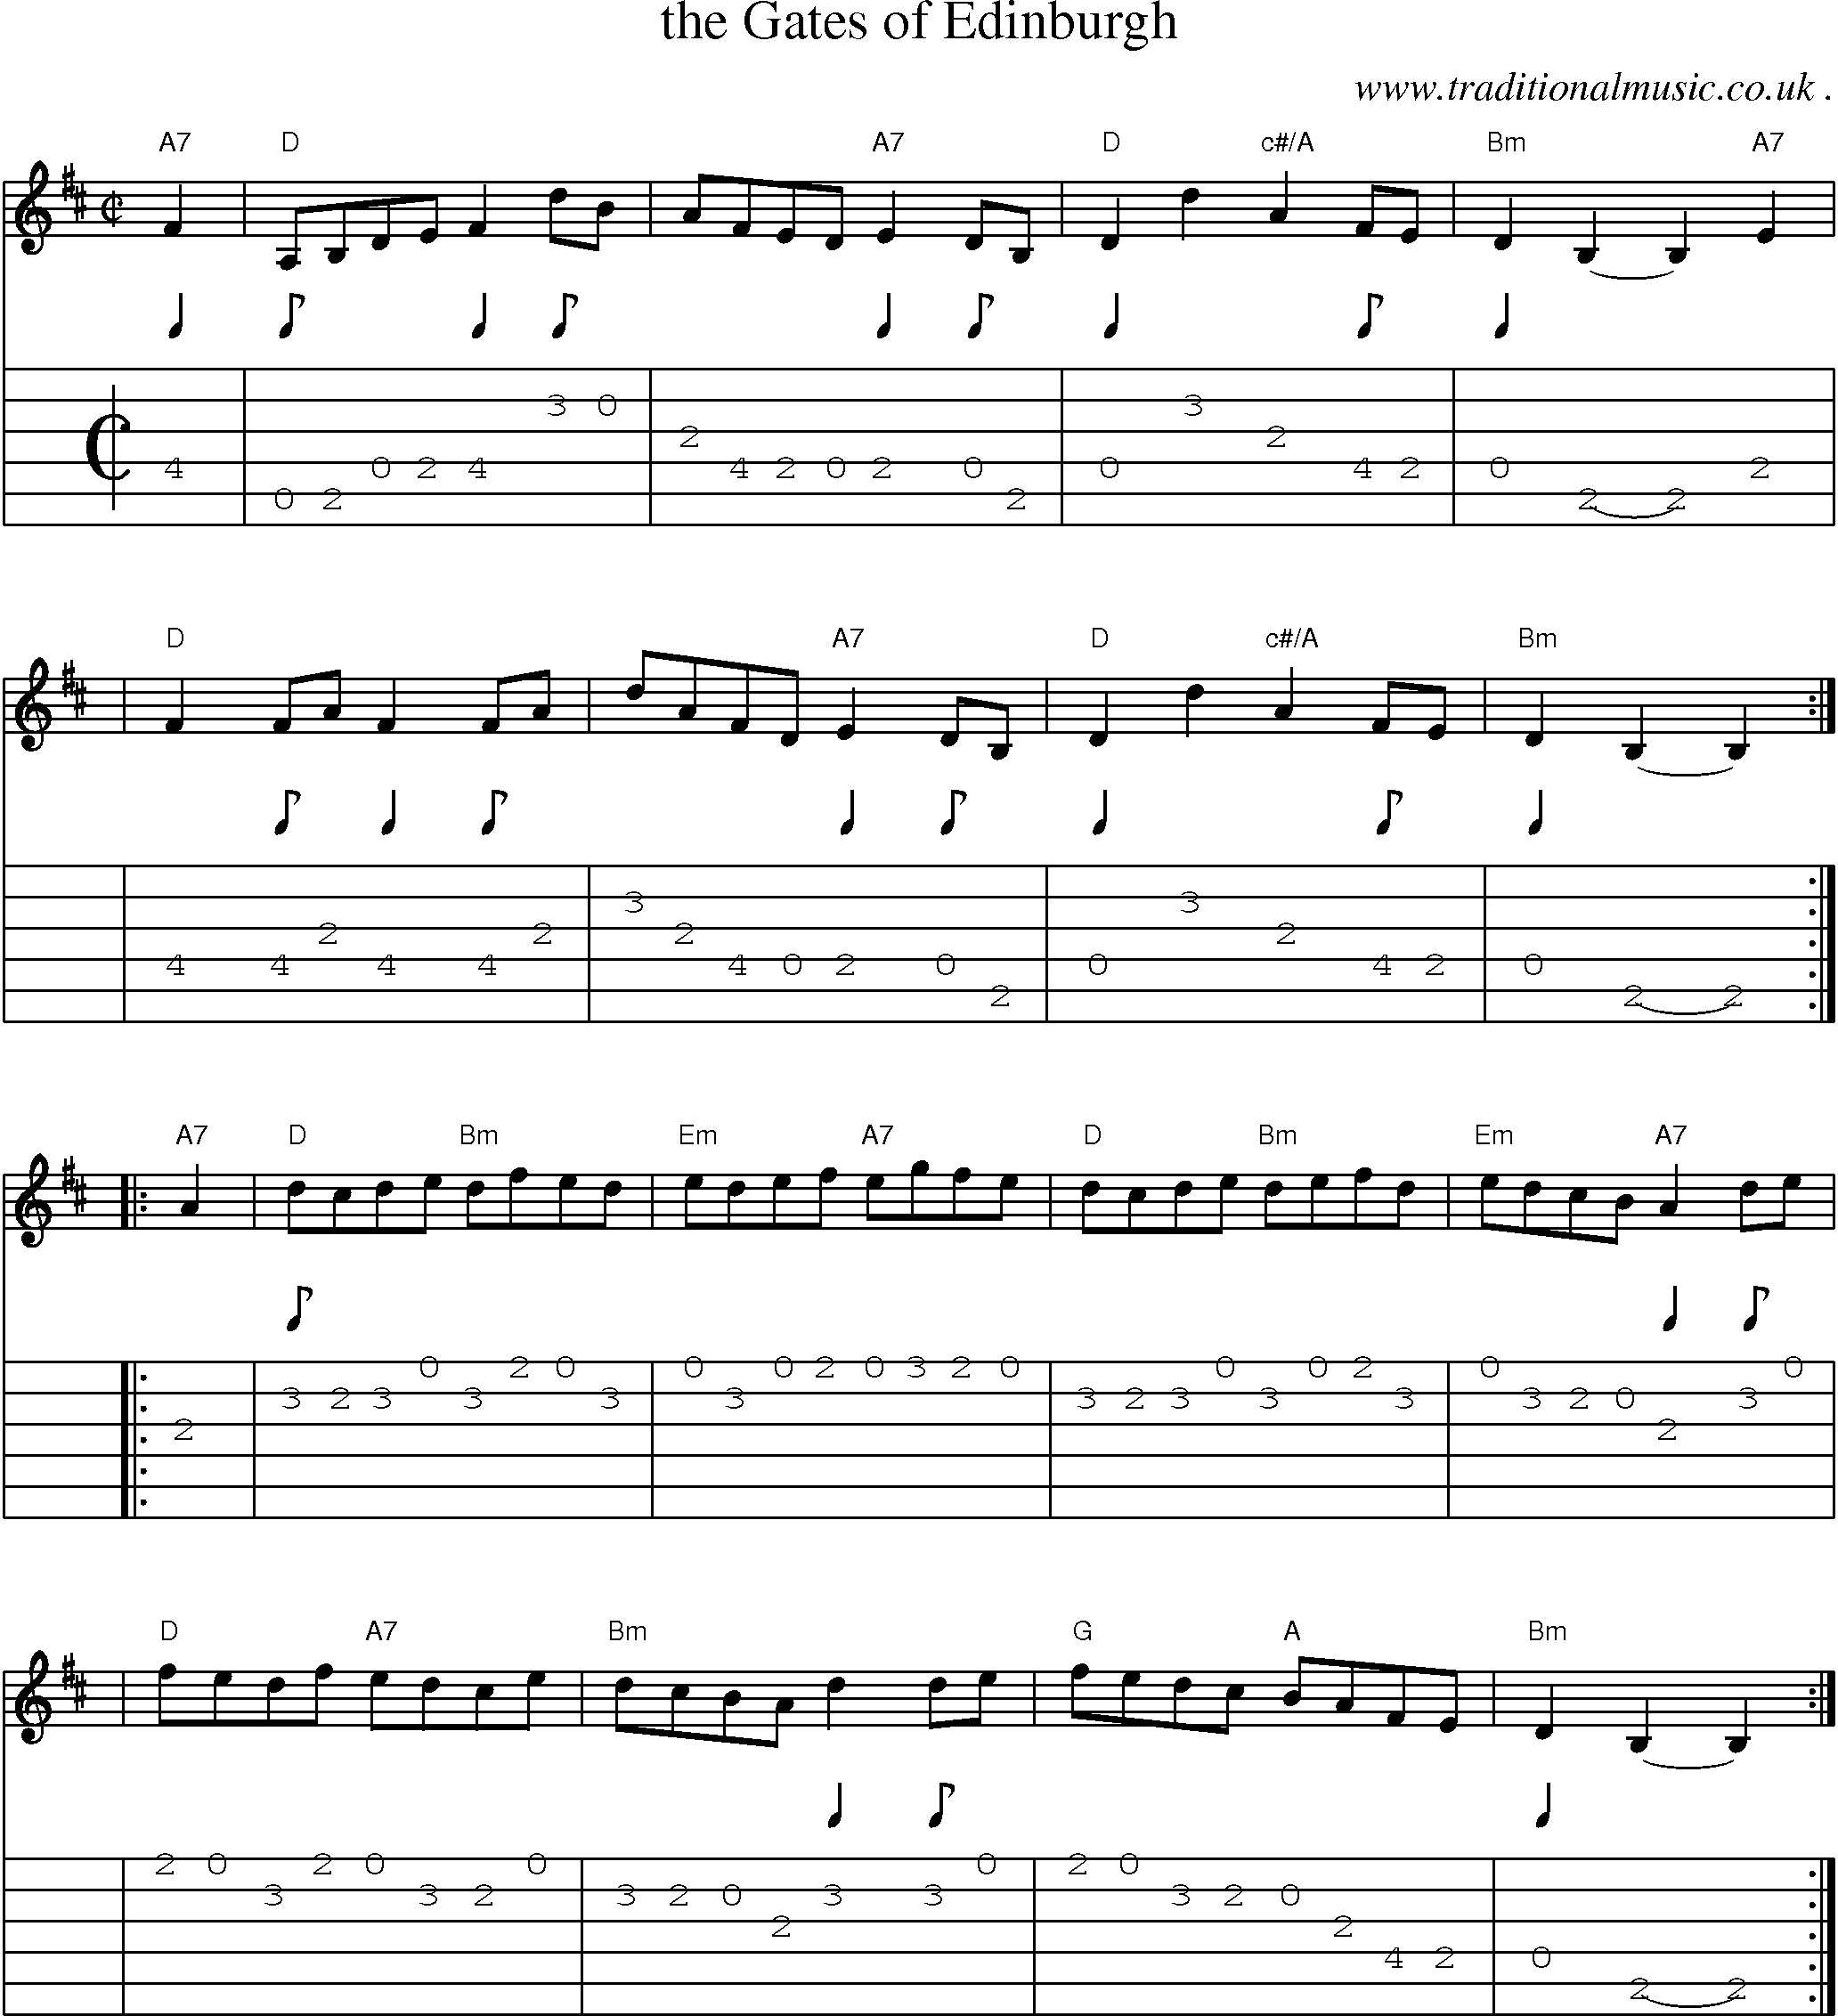 Sheet-music  score, Chords and Guitar Tabs for The Gates Of Edinburgh